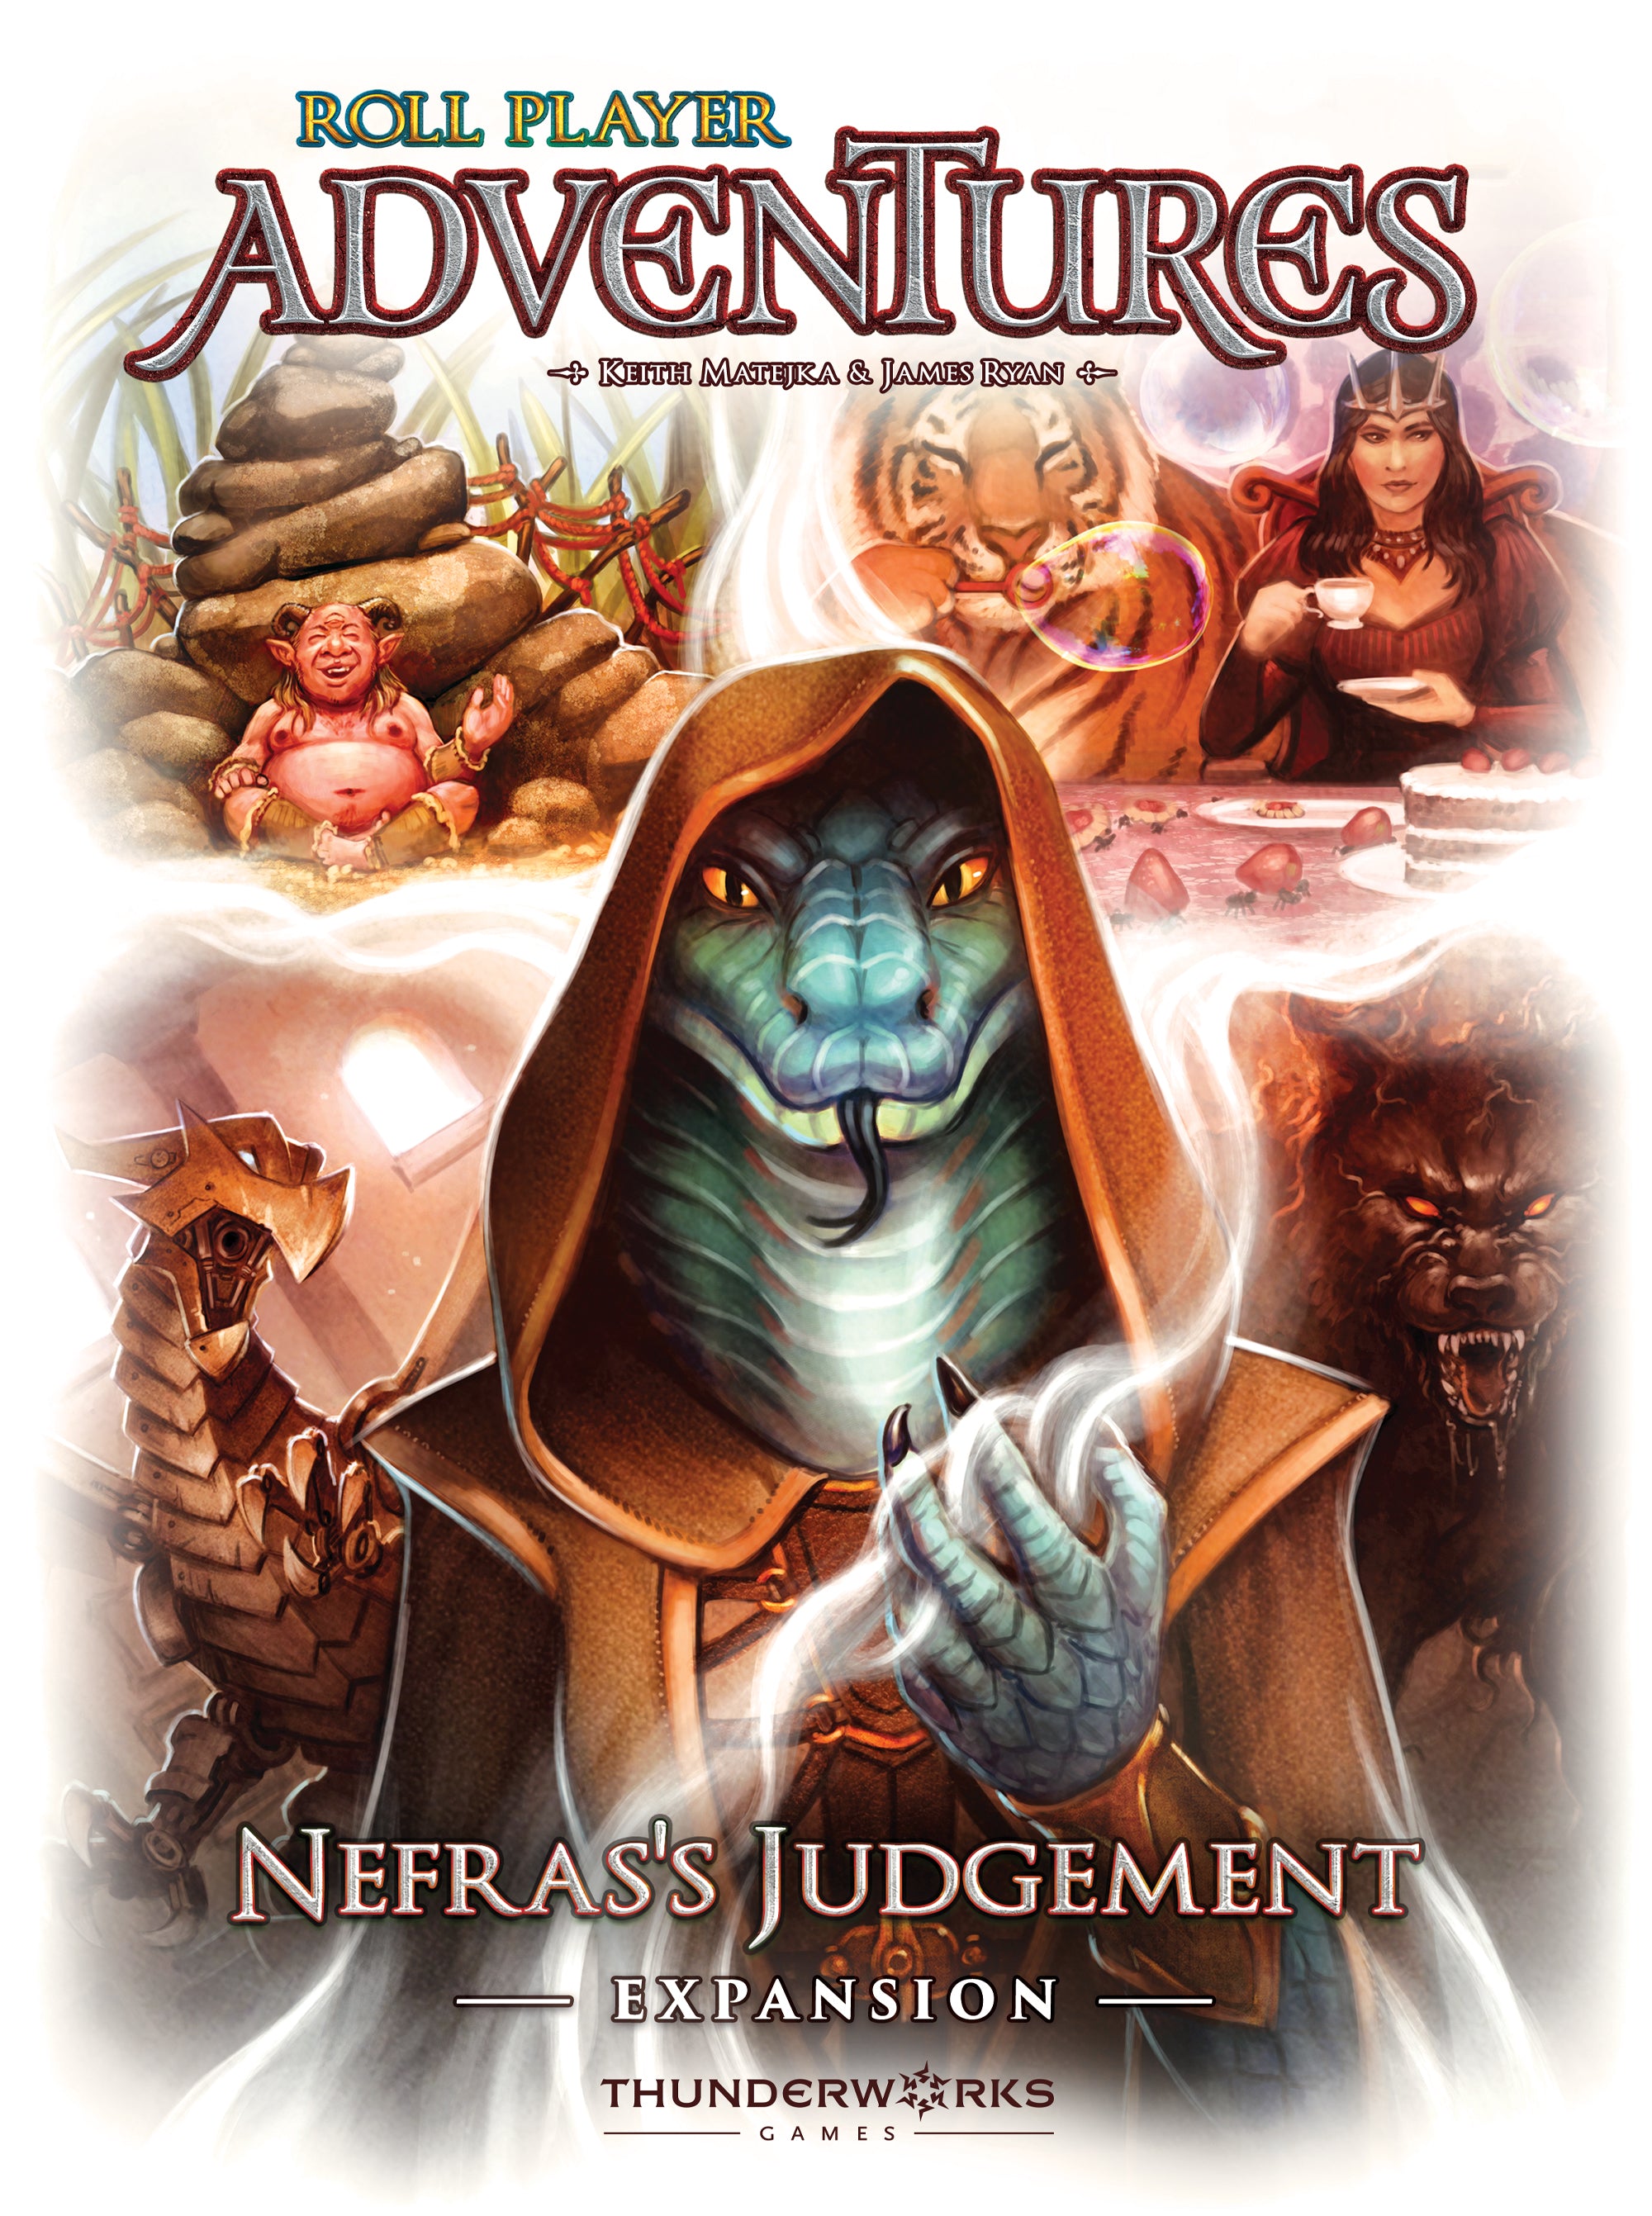 Roll Player Adventures: Nefras's Judgement box cover